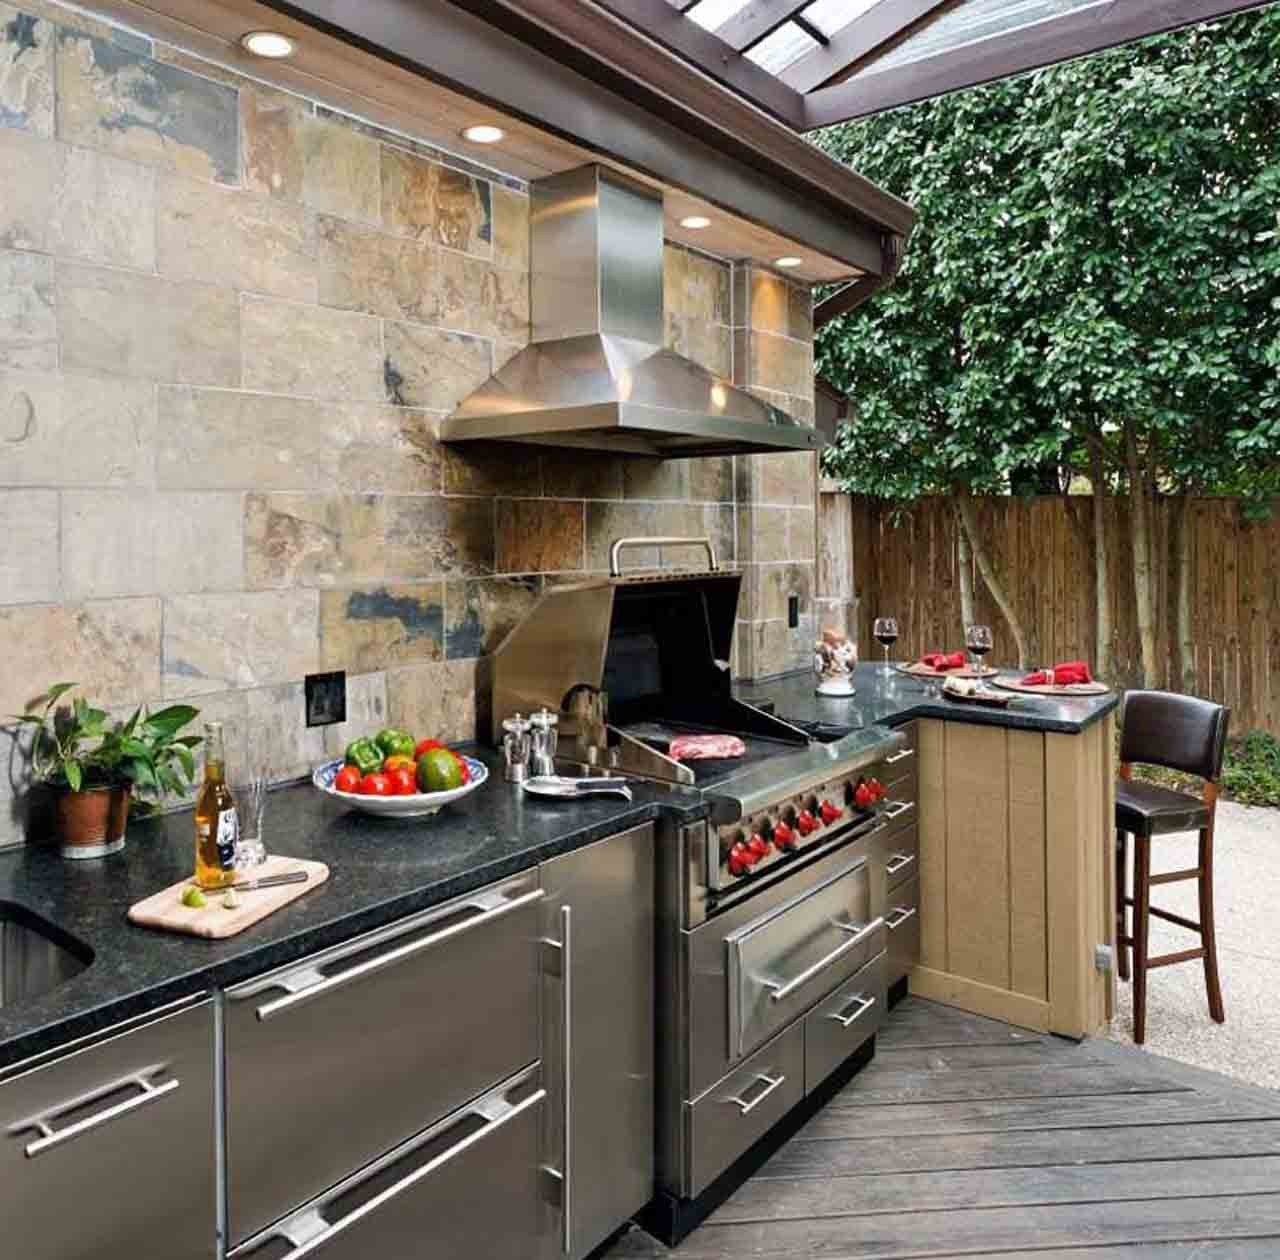 Outdoor Kitchen Cabinet Ideas
 How to Build Outdoor Kitchen Cabinets AllstateLogHomes